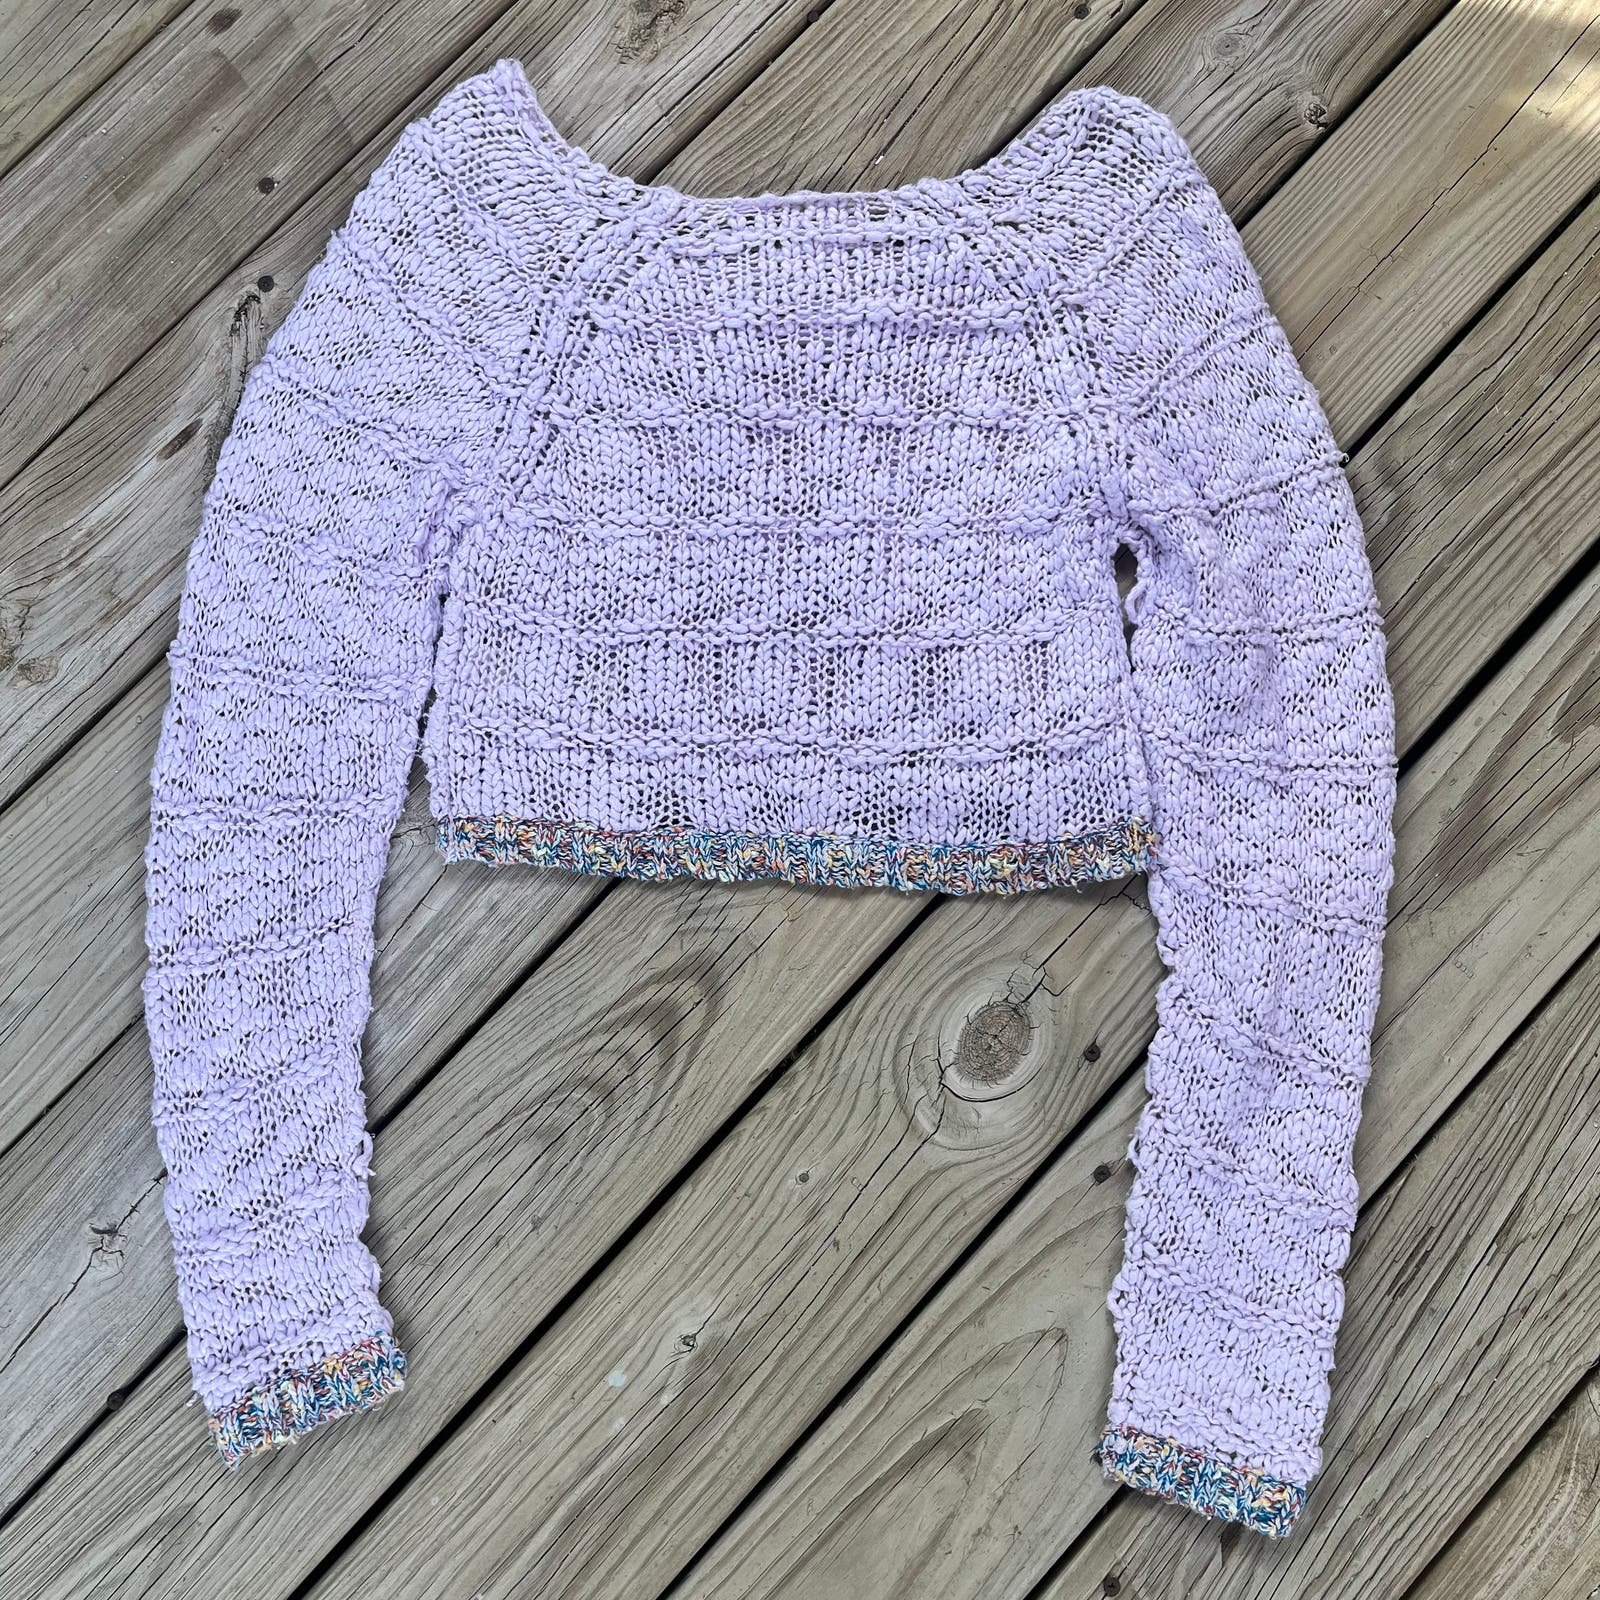 Personality Free People West Palm Sweater In Ethereal Combo Lilac Size S PKn5B77ah Novel 